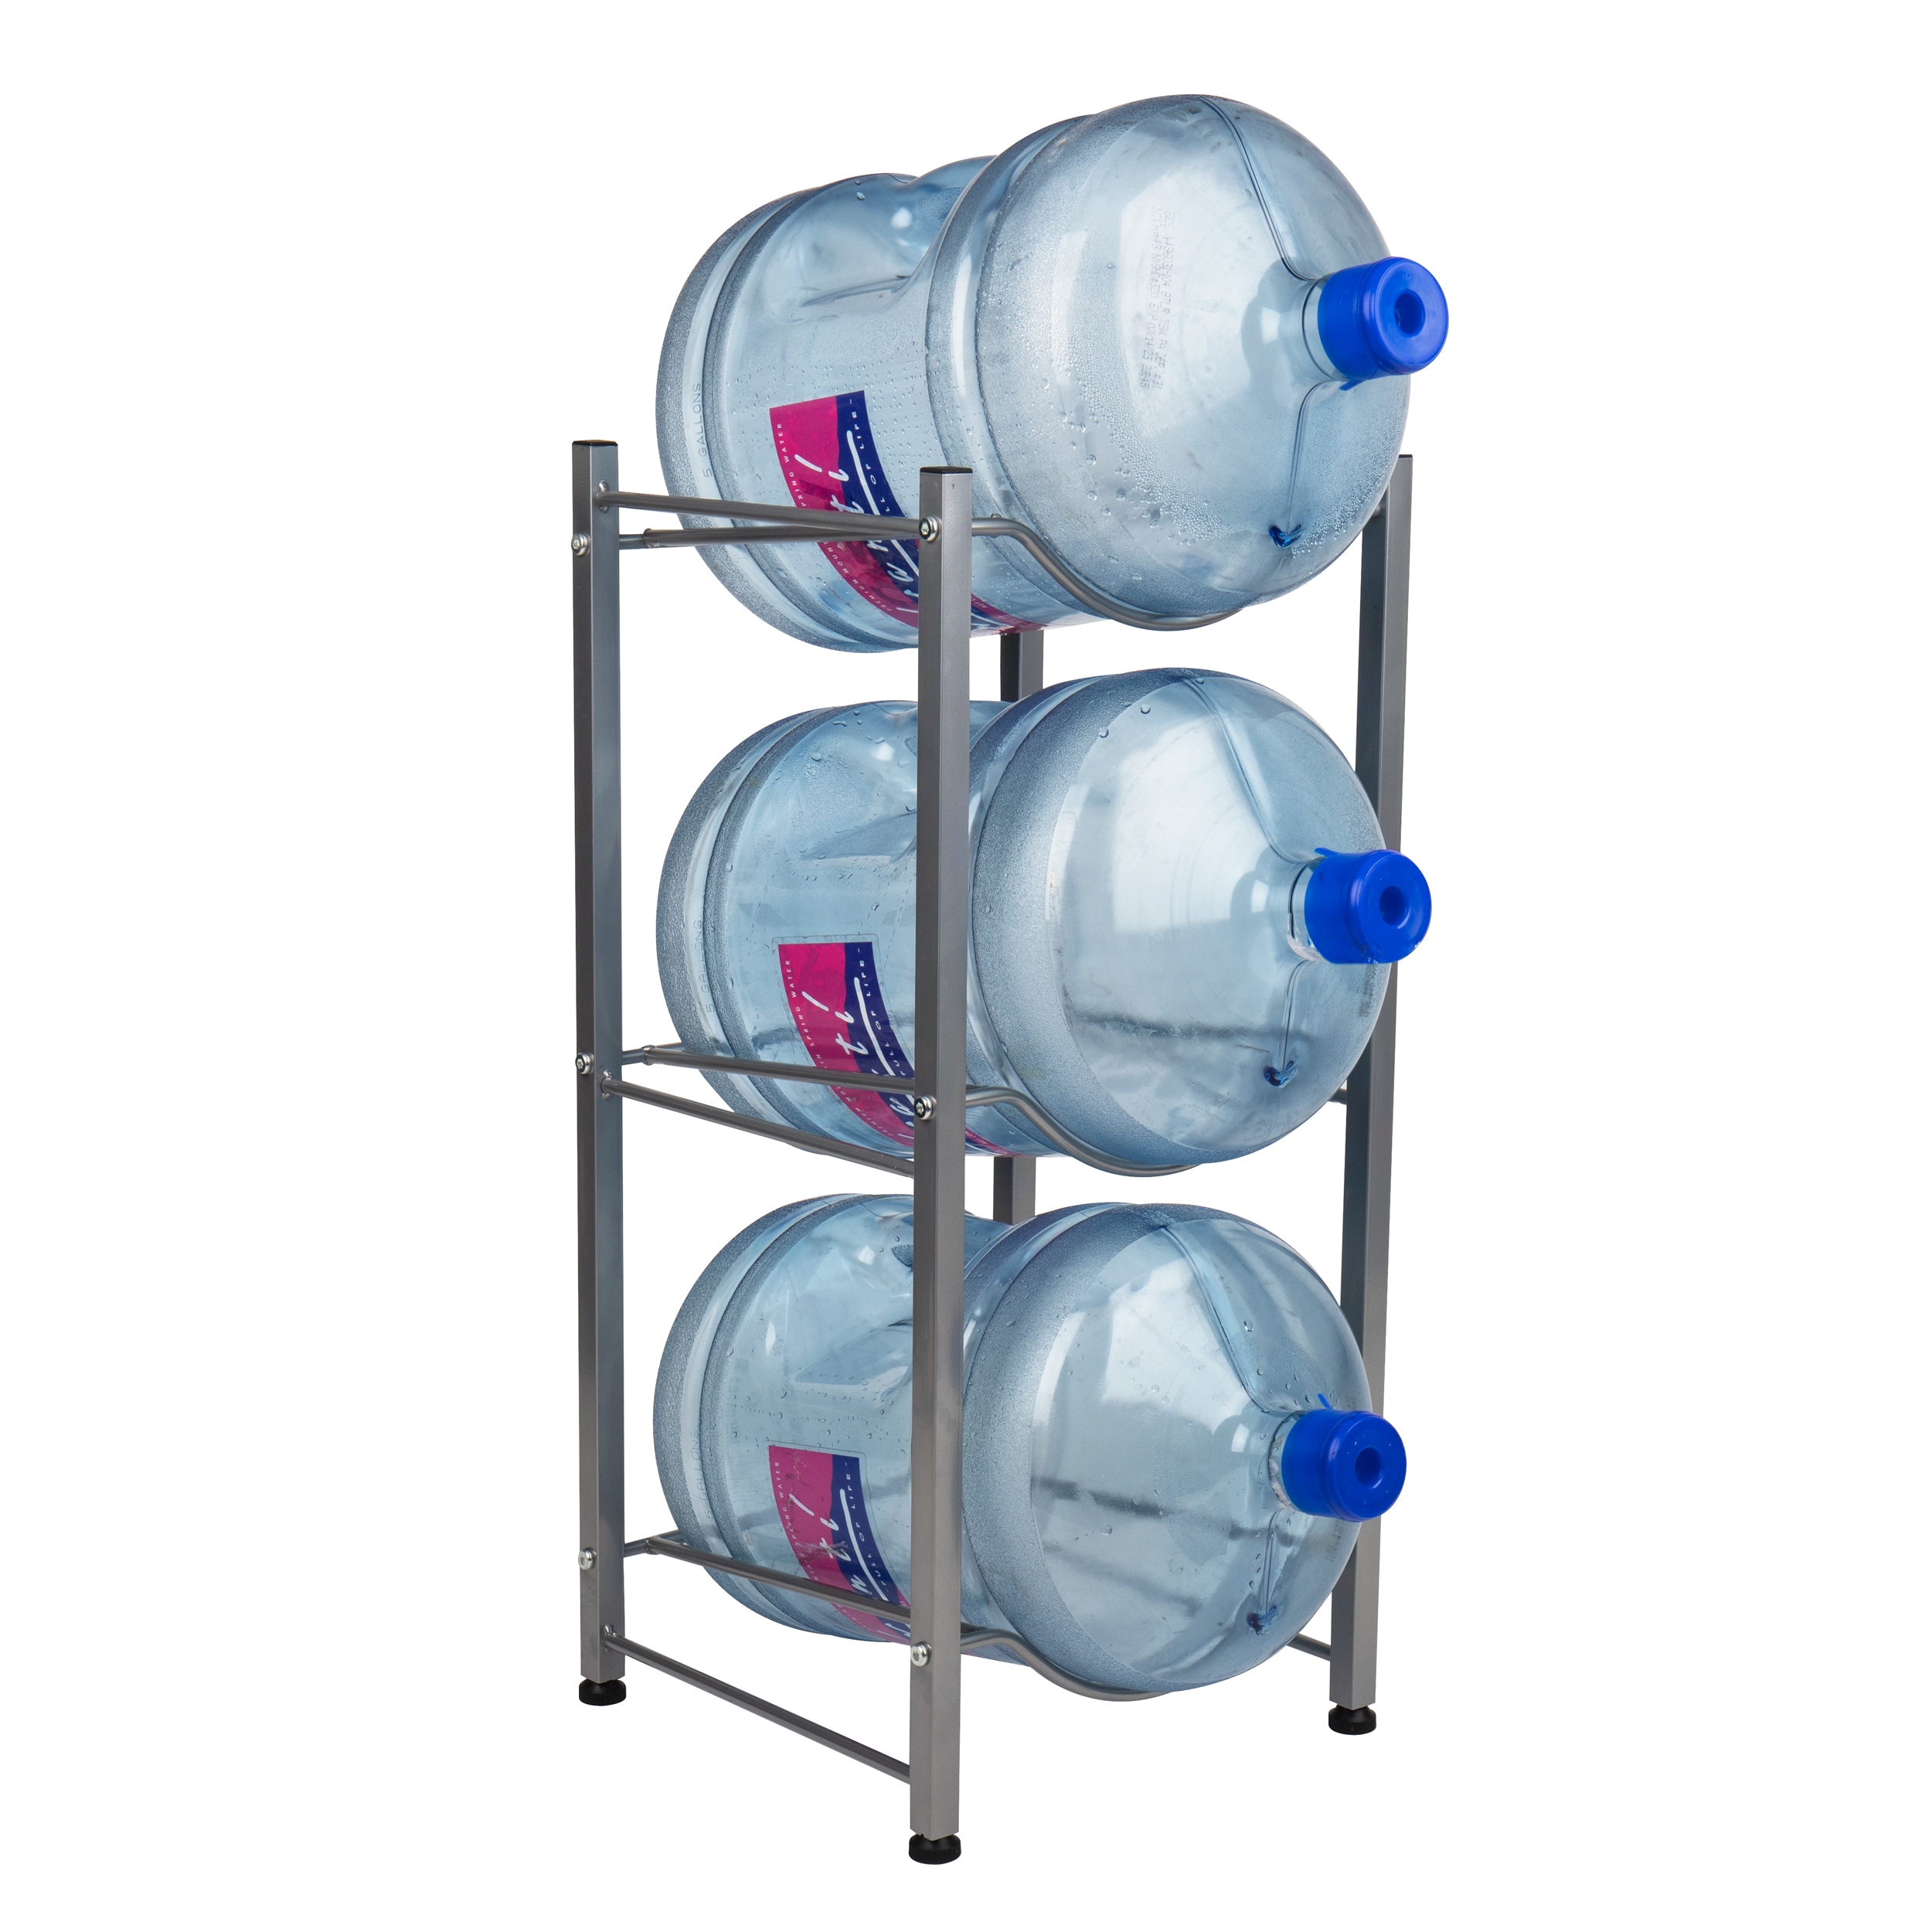 Water Bottle Storage Rack Shelf System Stand 3 Tier 5 Gallon Display Office Home 